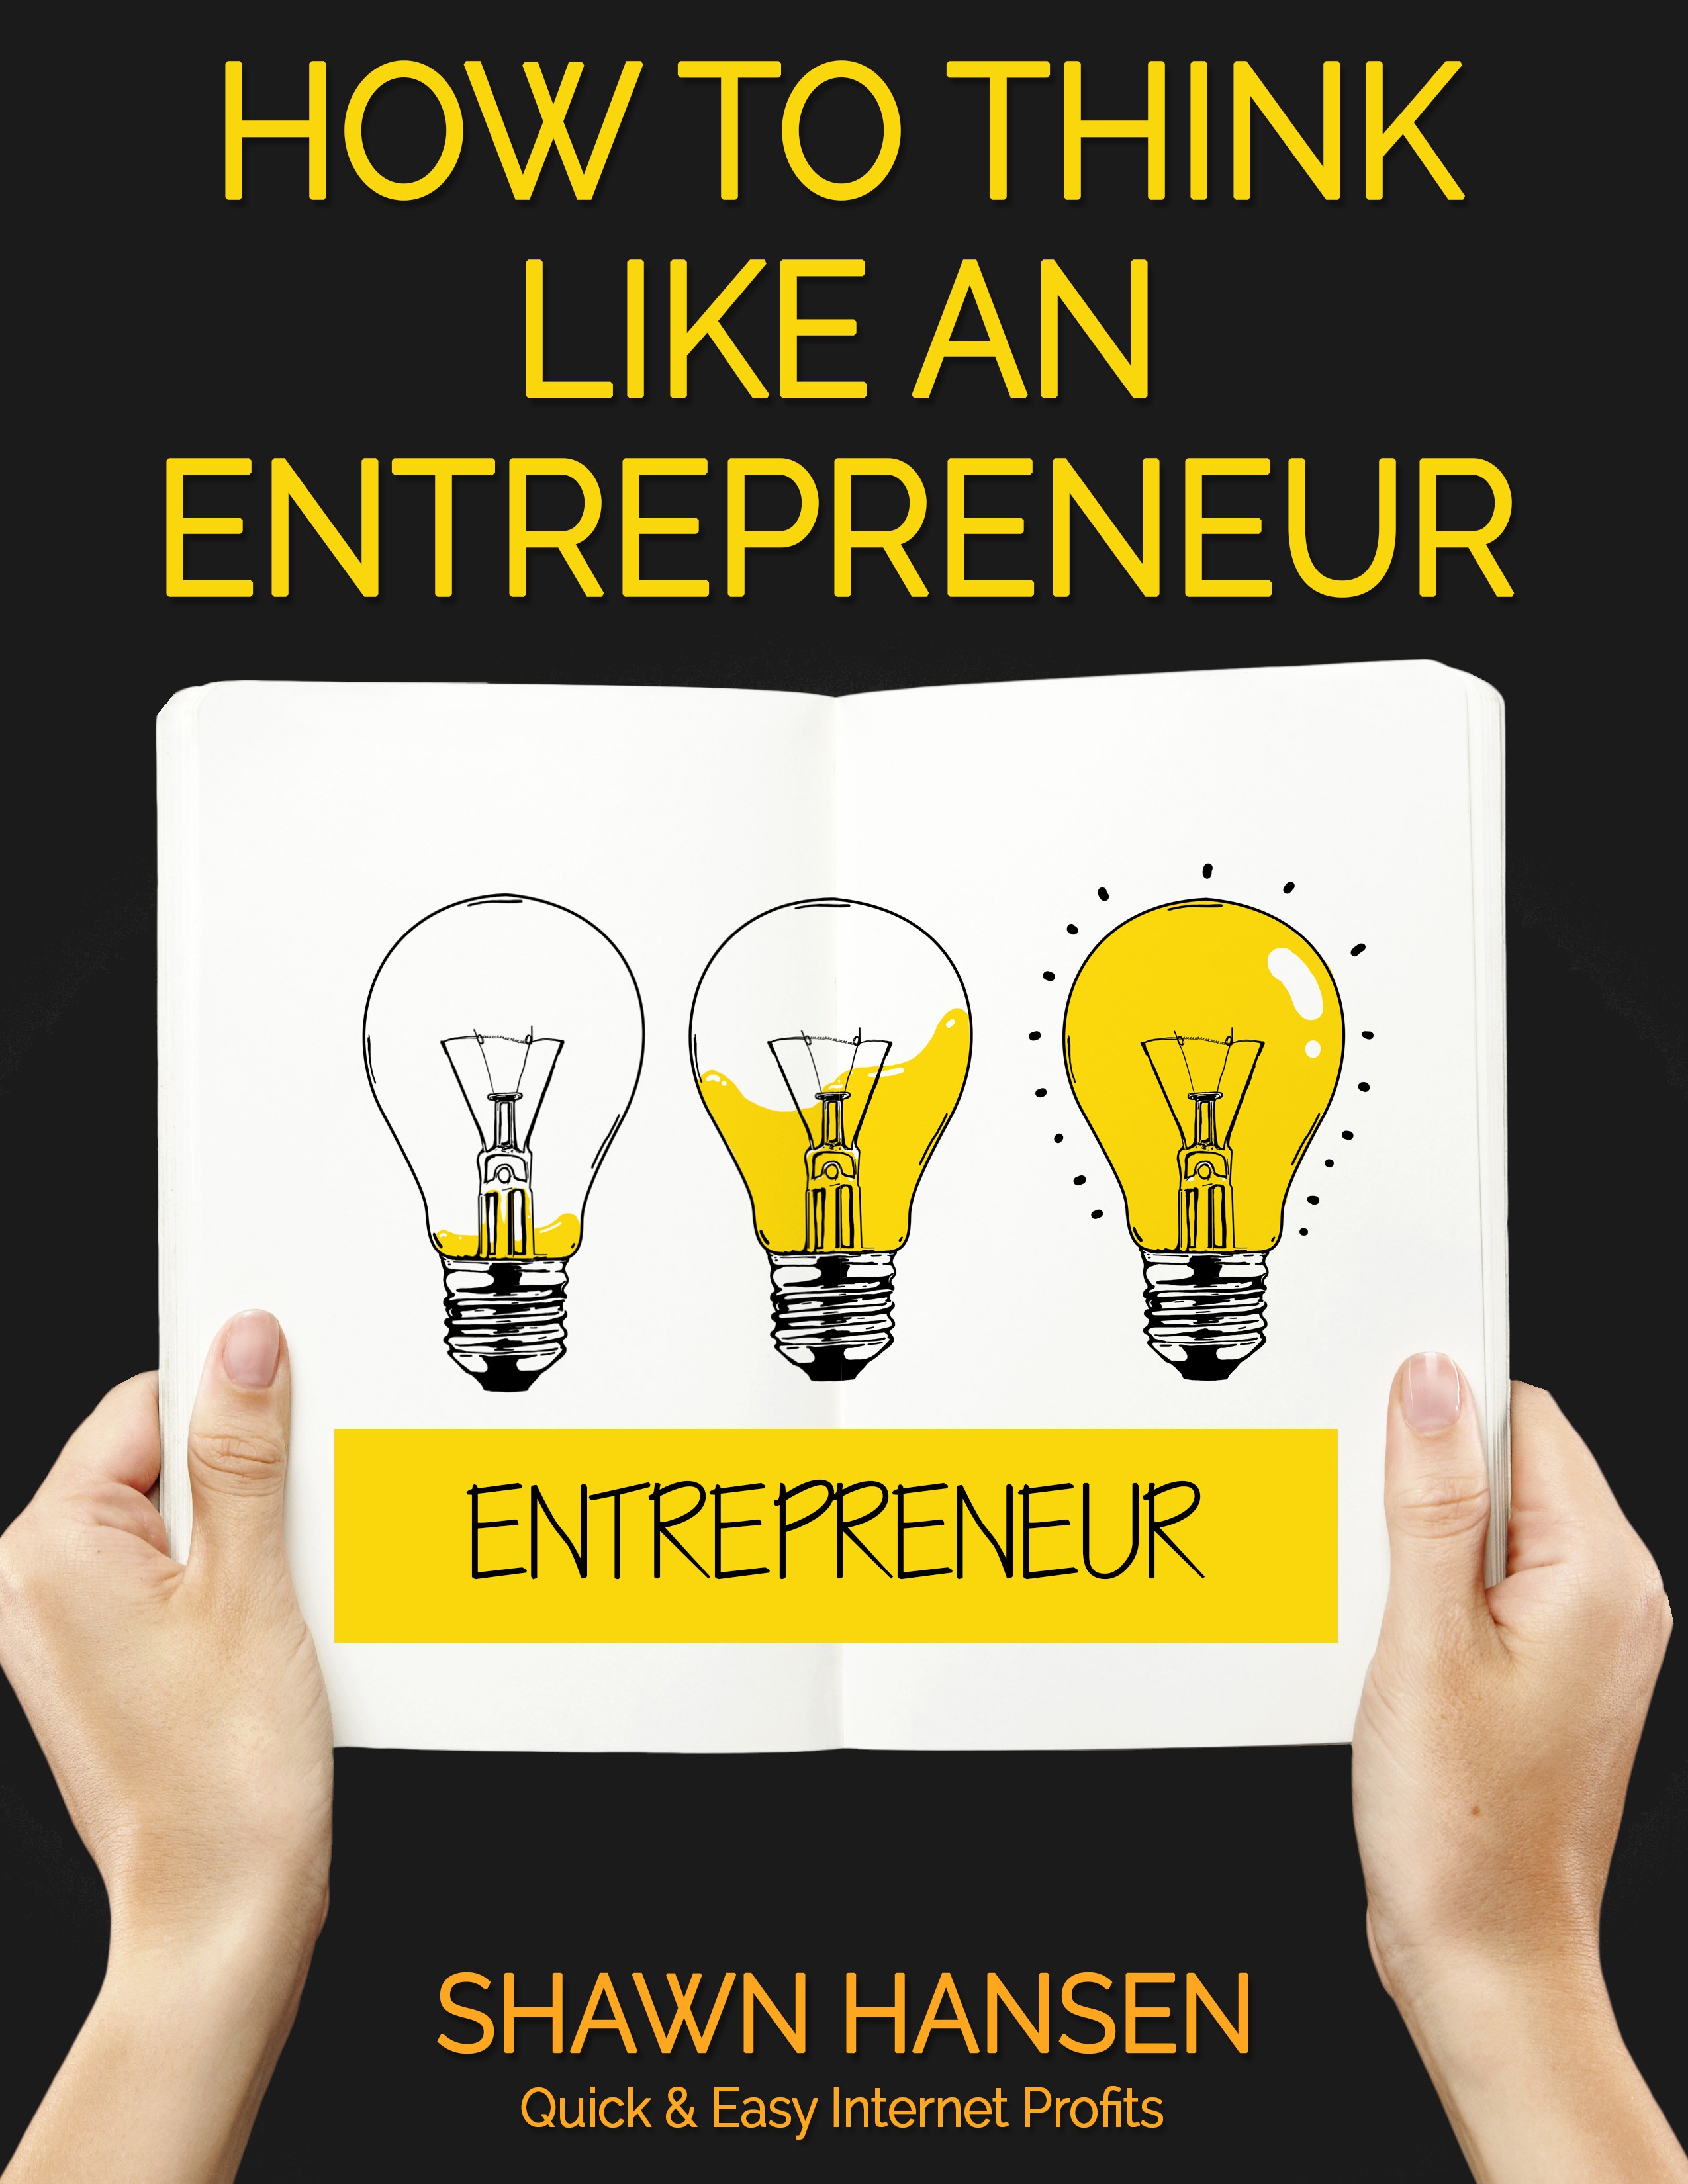 How to Think Like an Entrepreneur Presented by Shawn Hansen